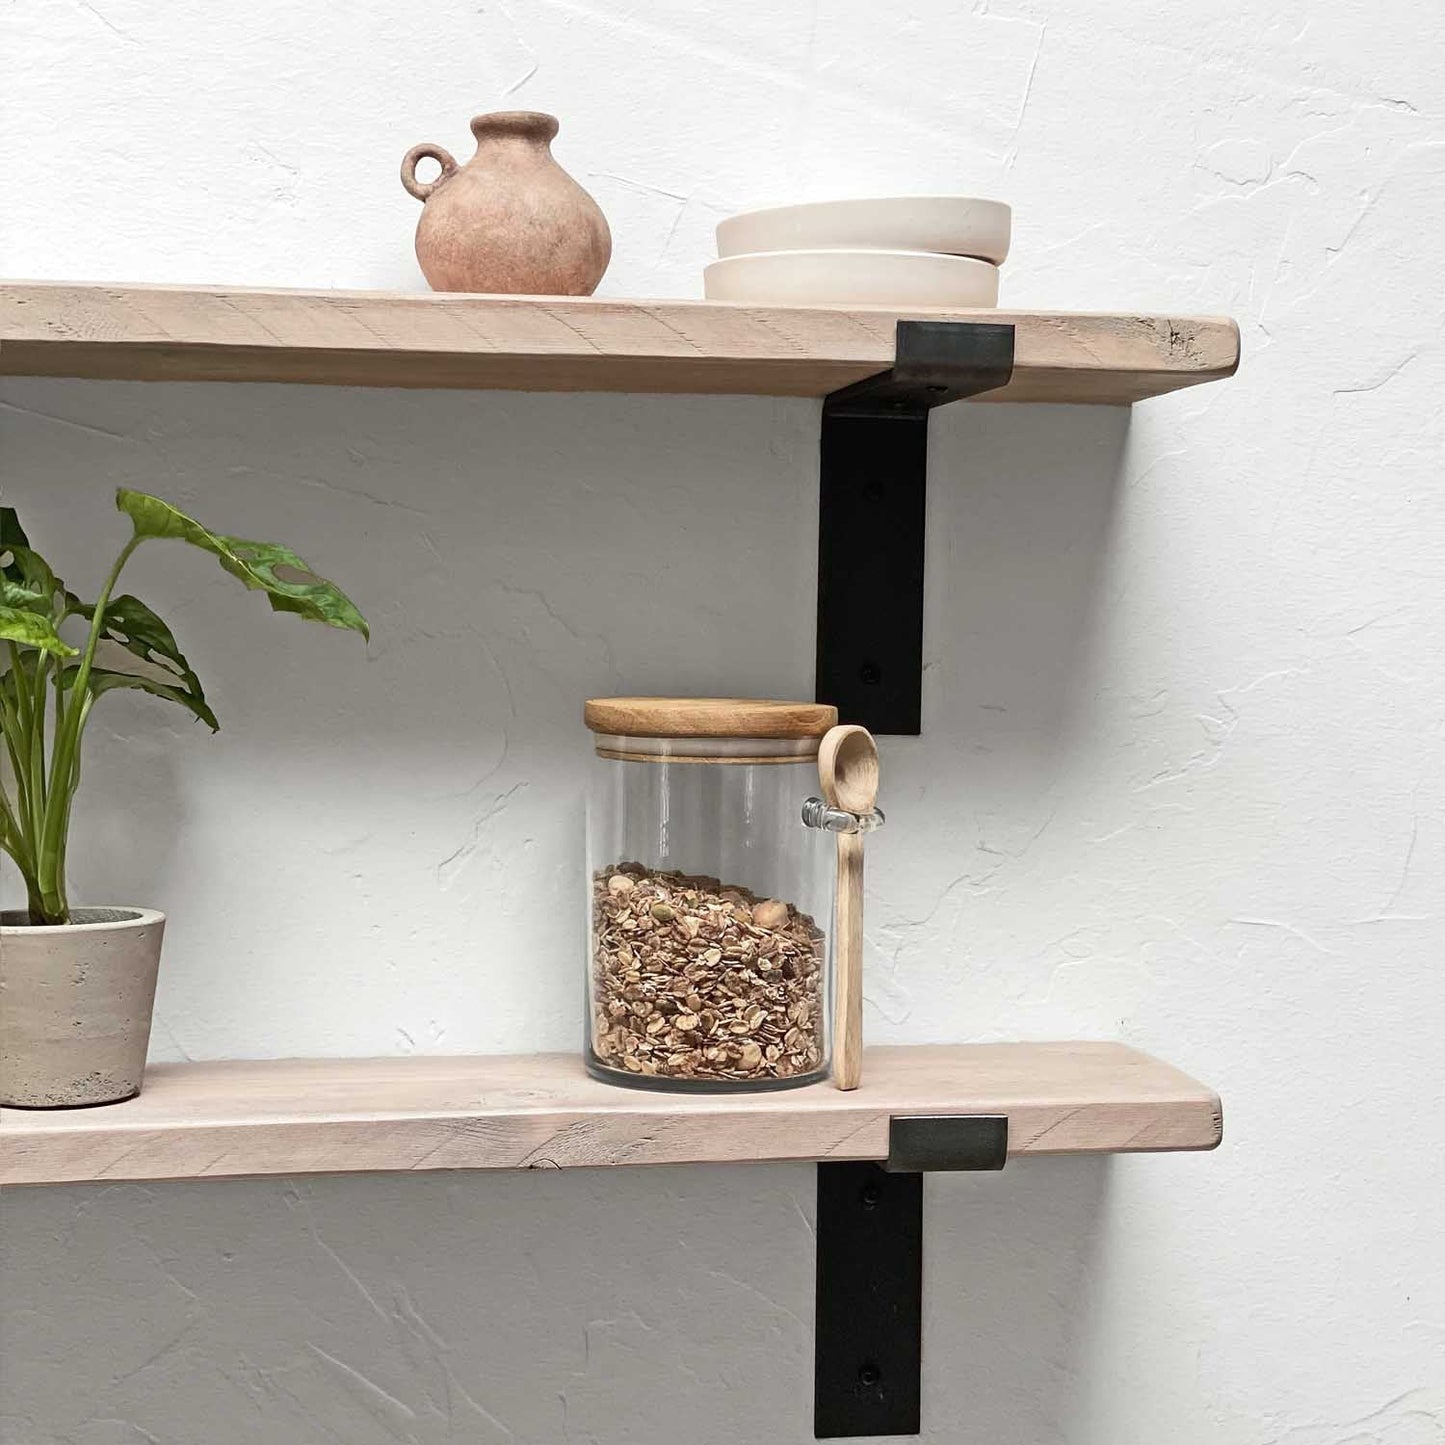 Decorative Storage Solution for Small Items